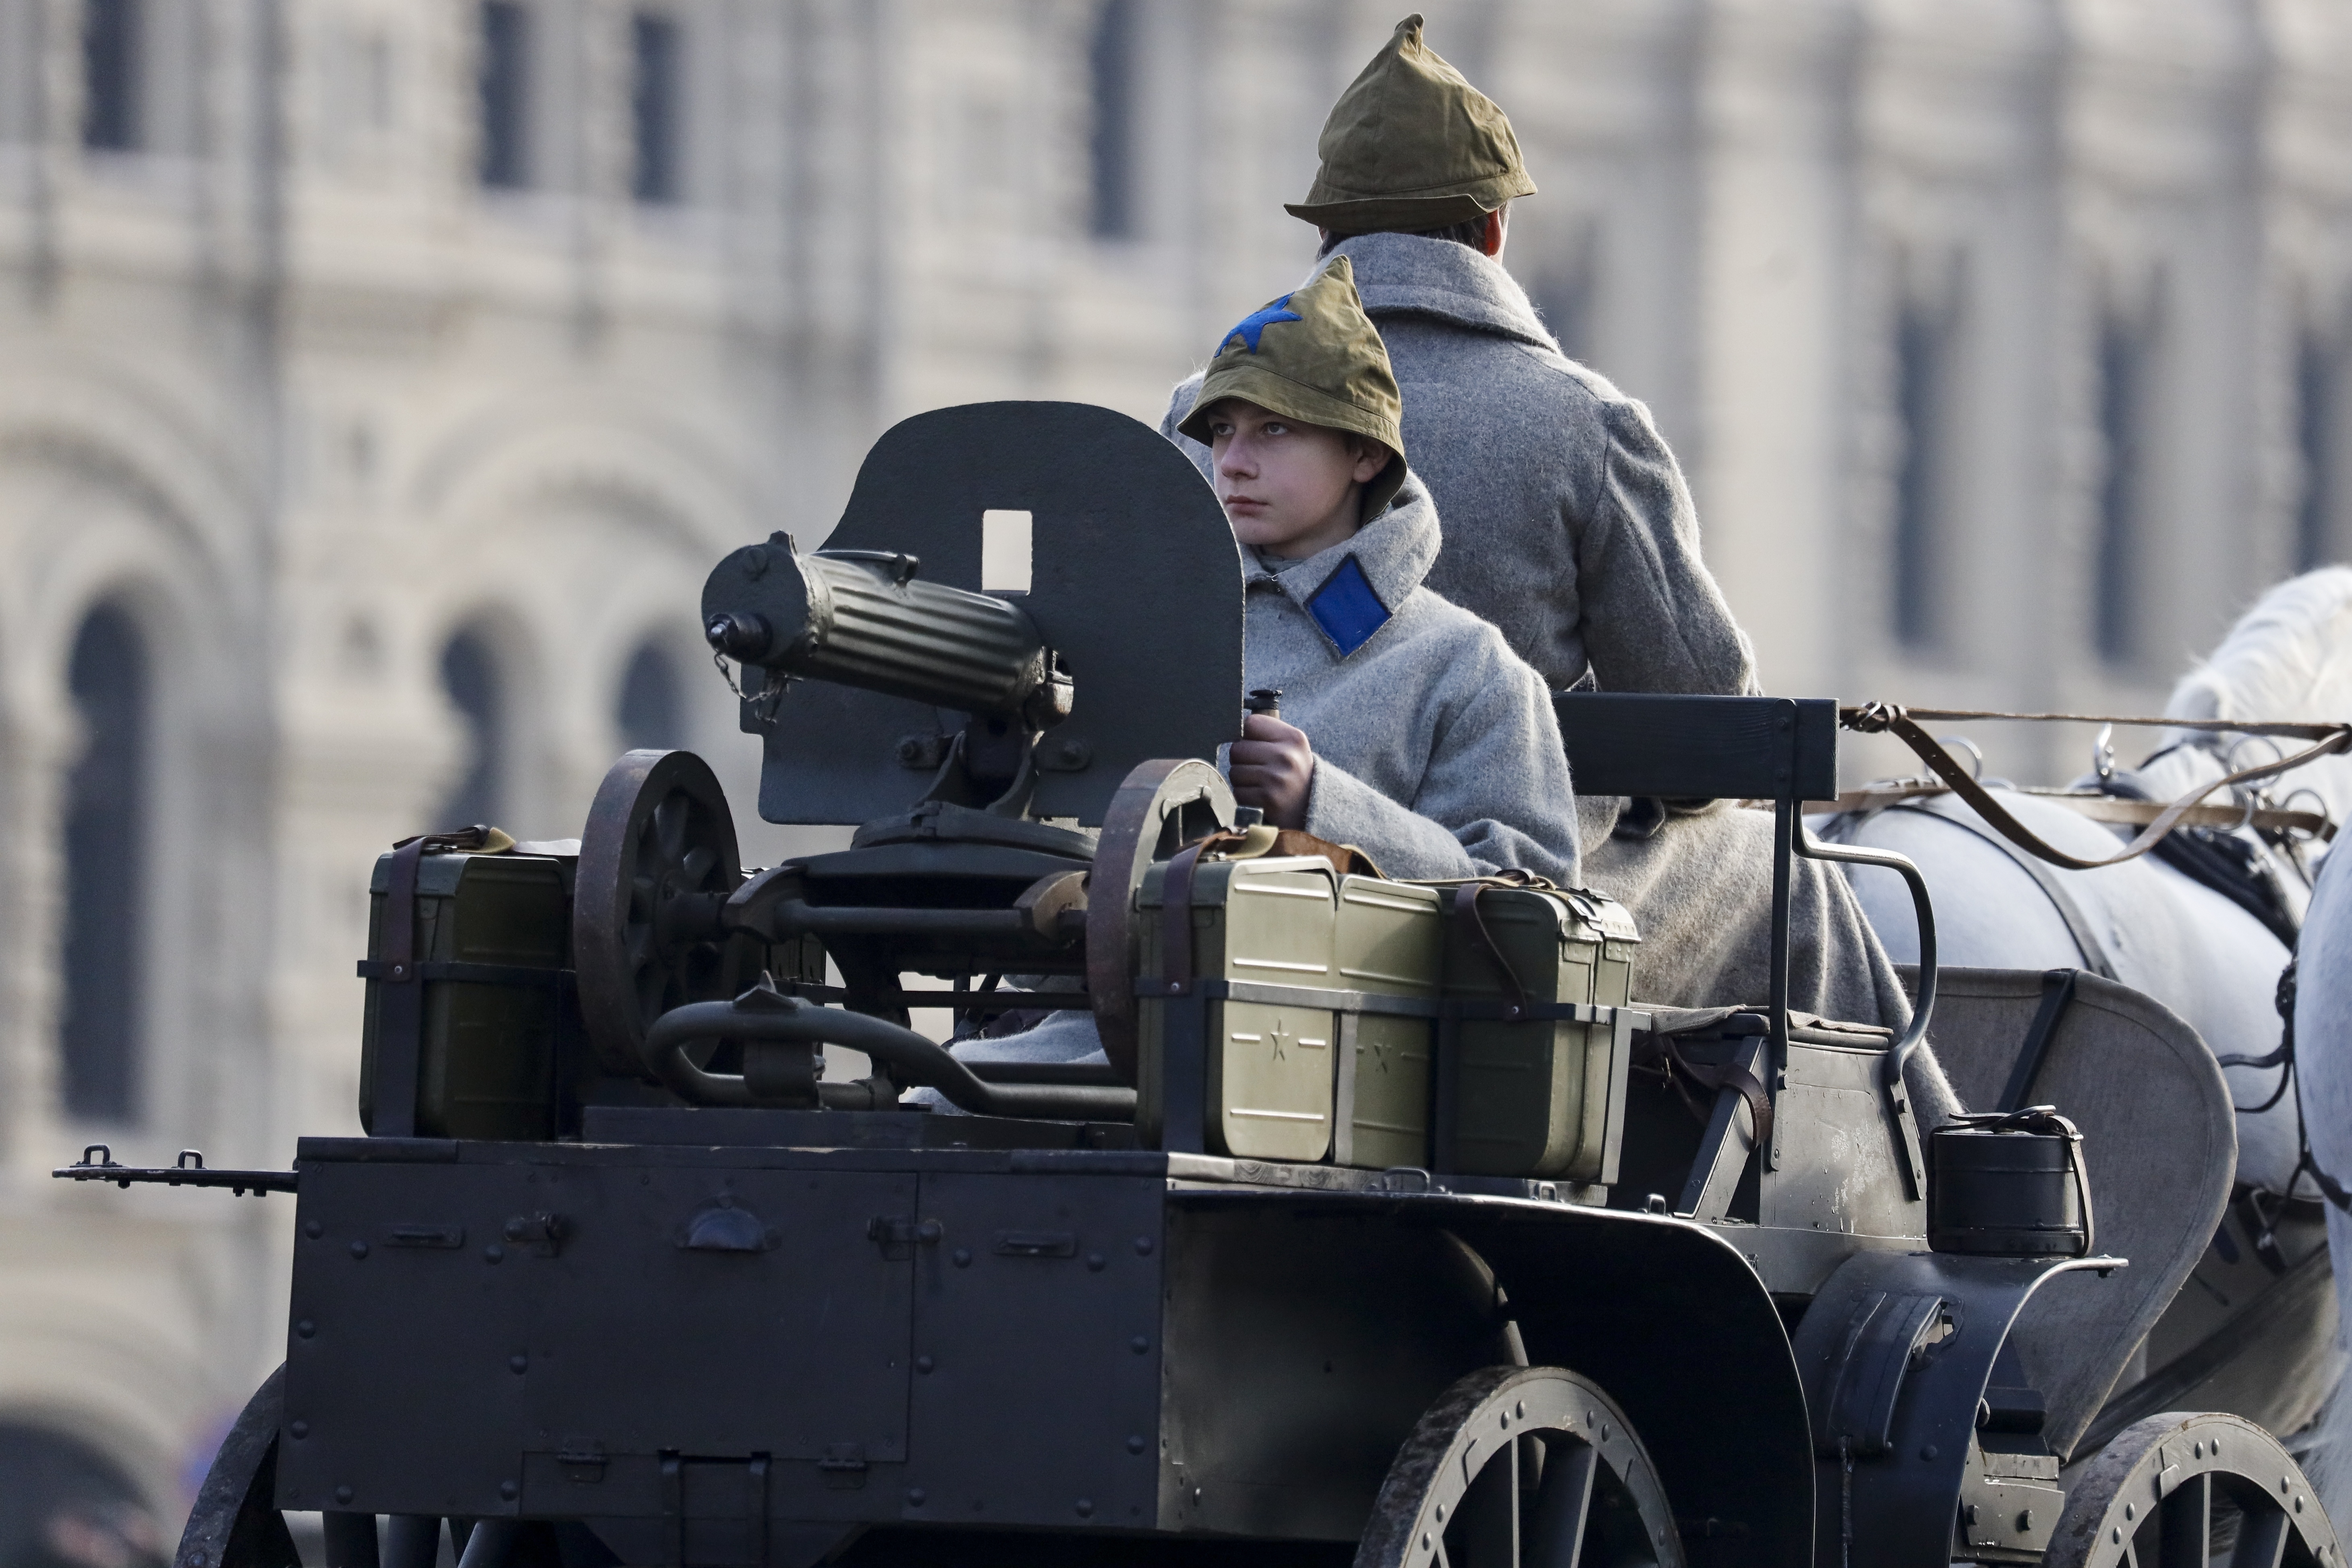 A volunteer dressed in a Red Army World War II uniform sits atop of a tachanka a horse-drawn machine gun, during the Nov. 7 parade in Red Square, in Moscow, Russia, Wednesday, Nov. 7, 2018. The parade marked the 77th anniversary of a World War II historic parade in Red Square and honored the participants in the Nov. 7, 1941 parade who headed directly to the front lines to defend Moscow from the Nazi forces. (AP Photo/Alexander Zemlianichenko)